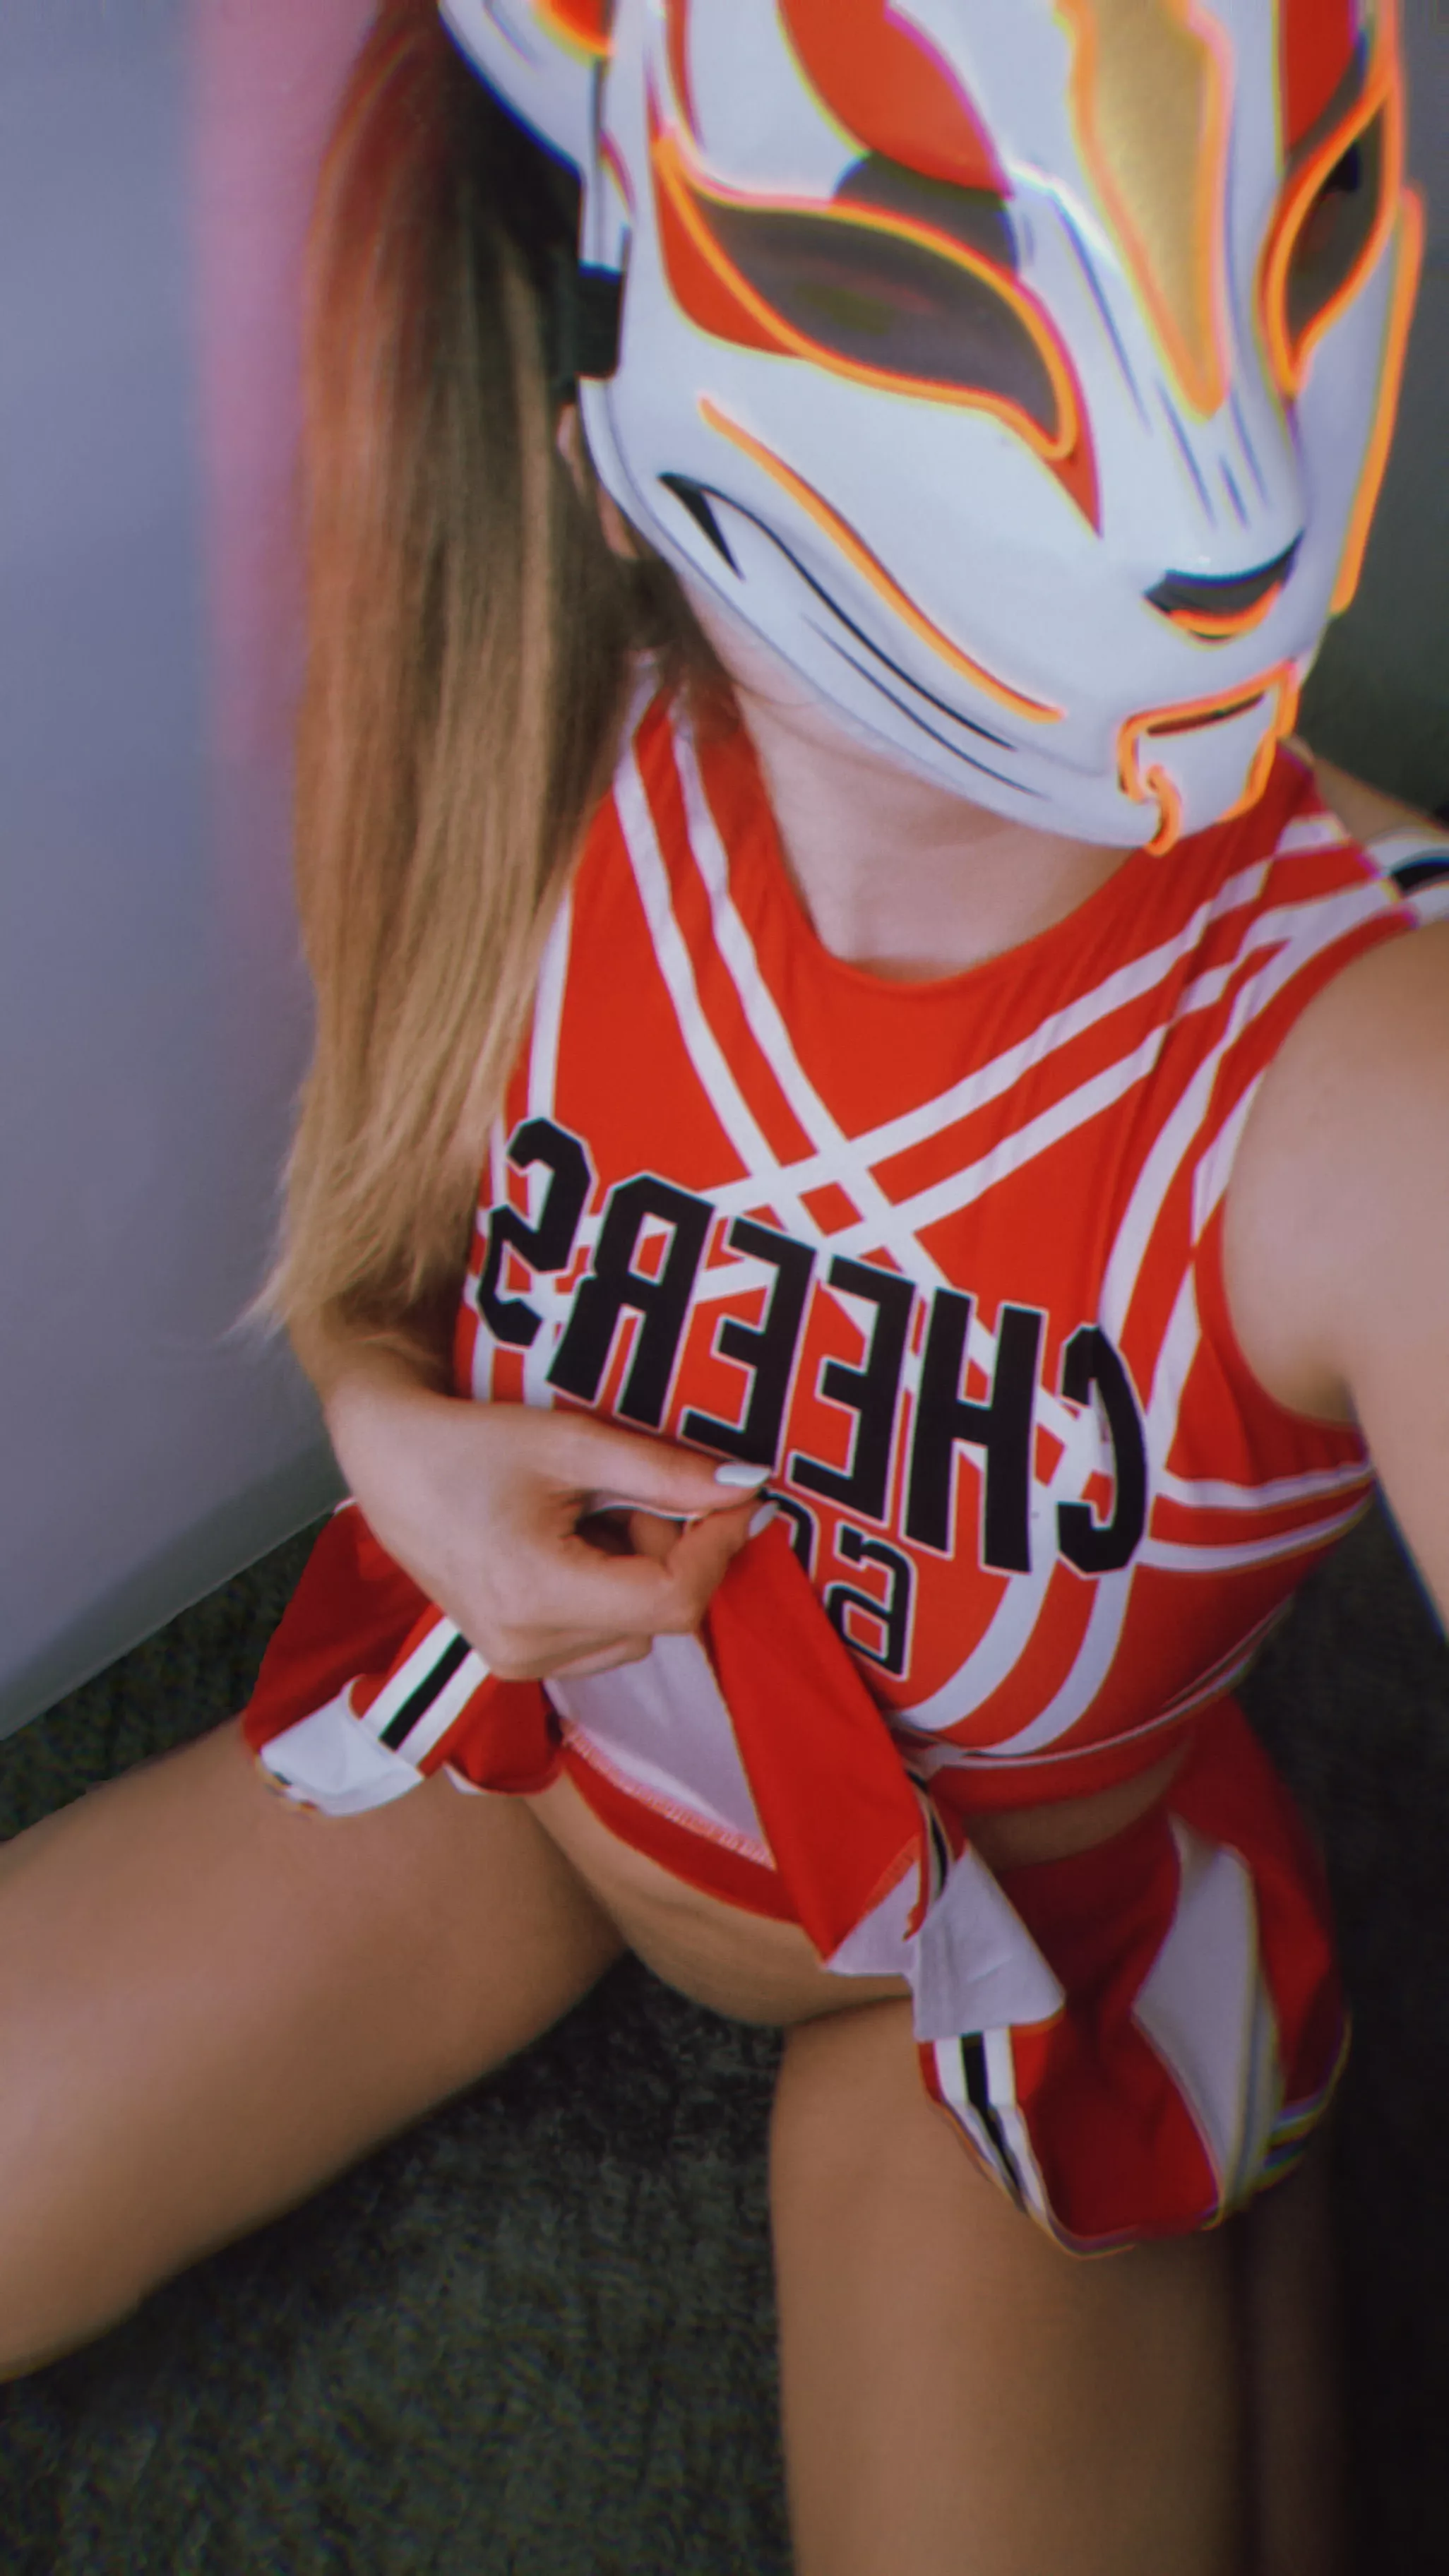 How about a cheerleader upskirt? nudes by Foxyyuna